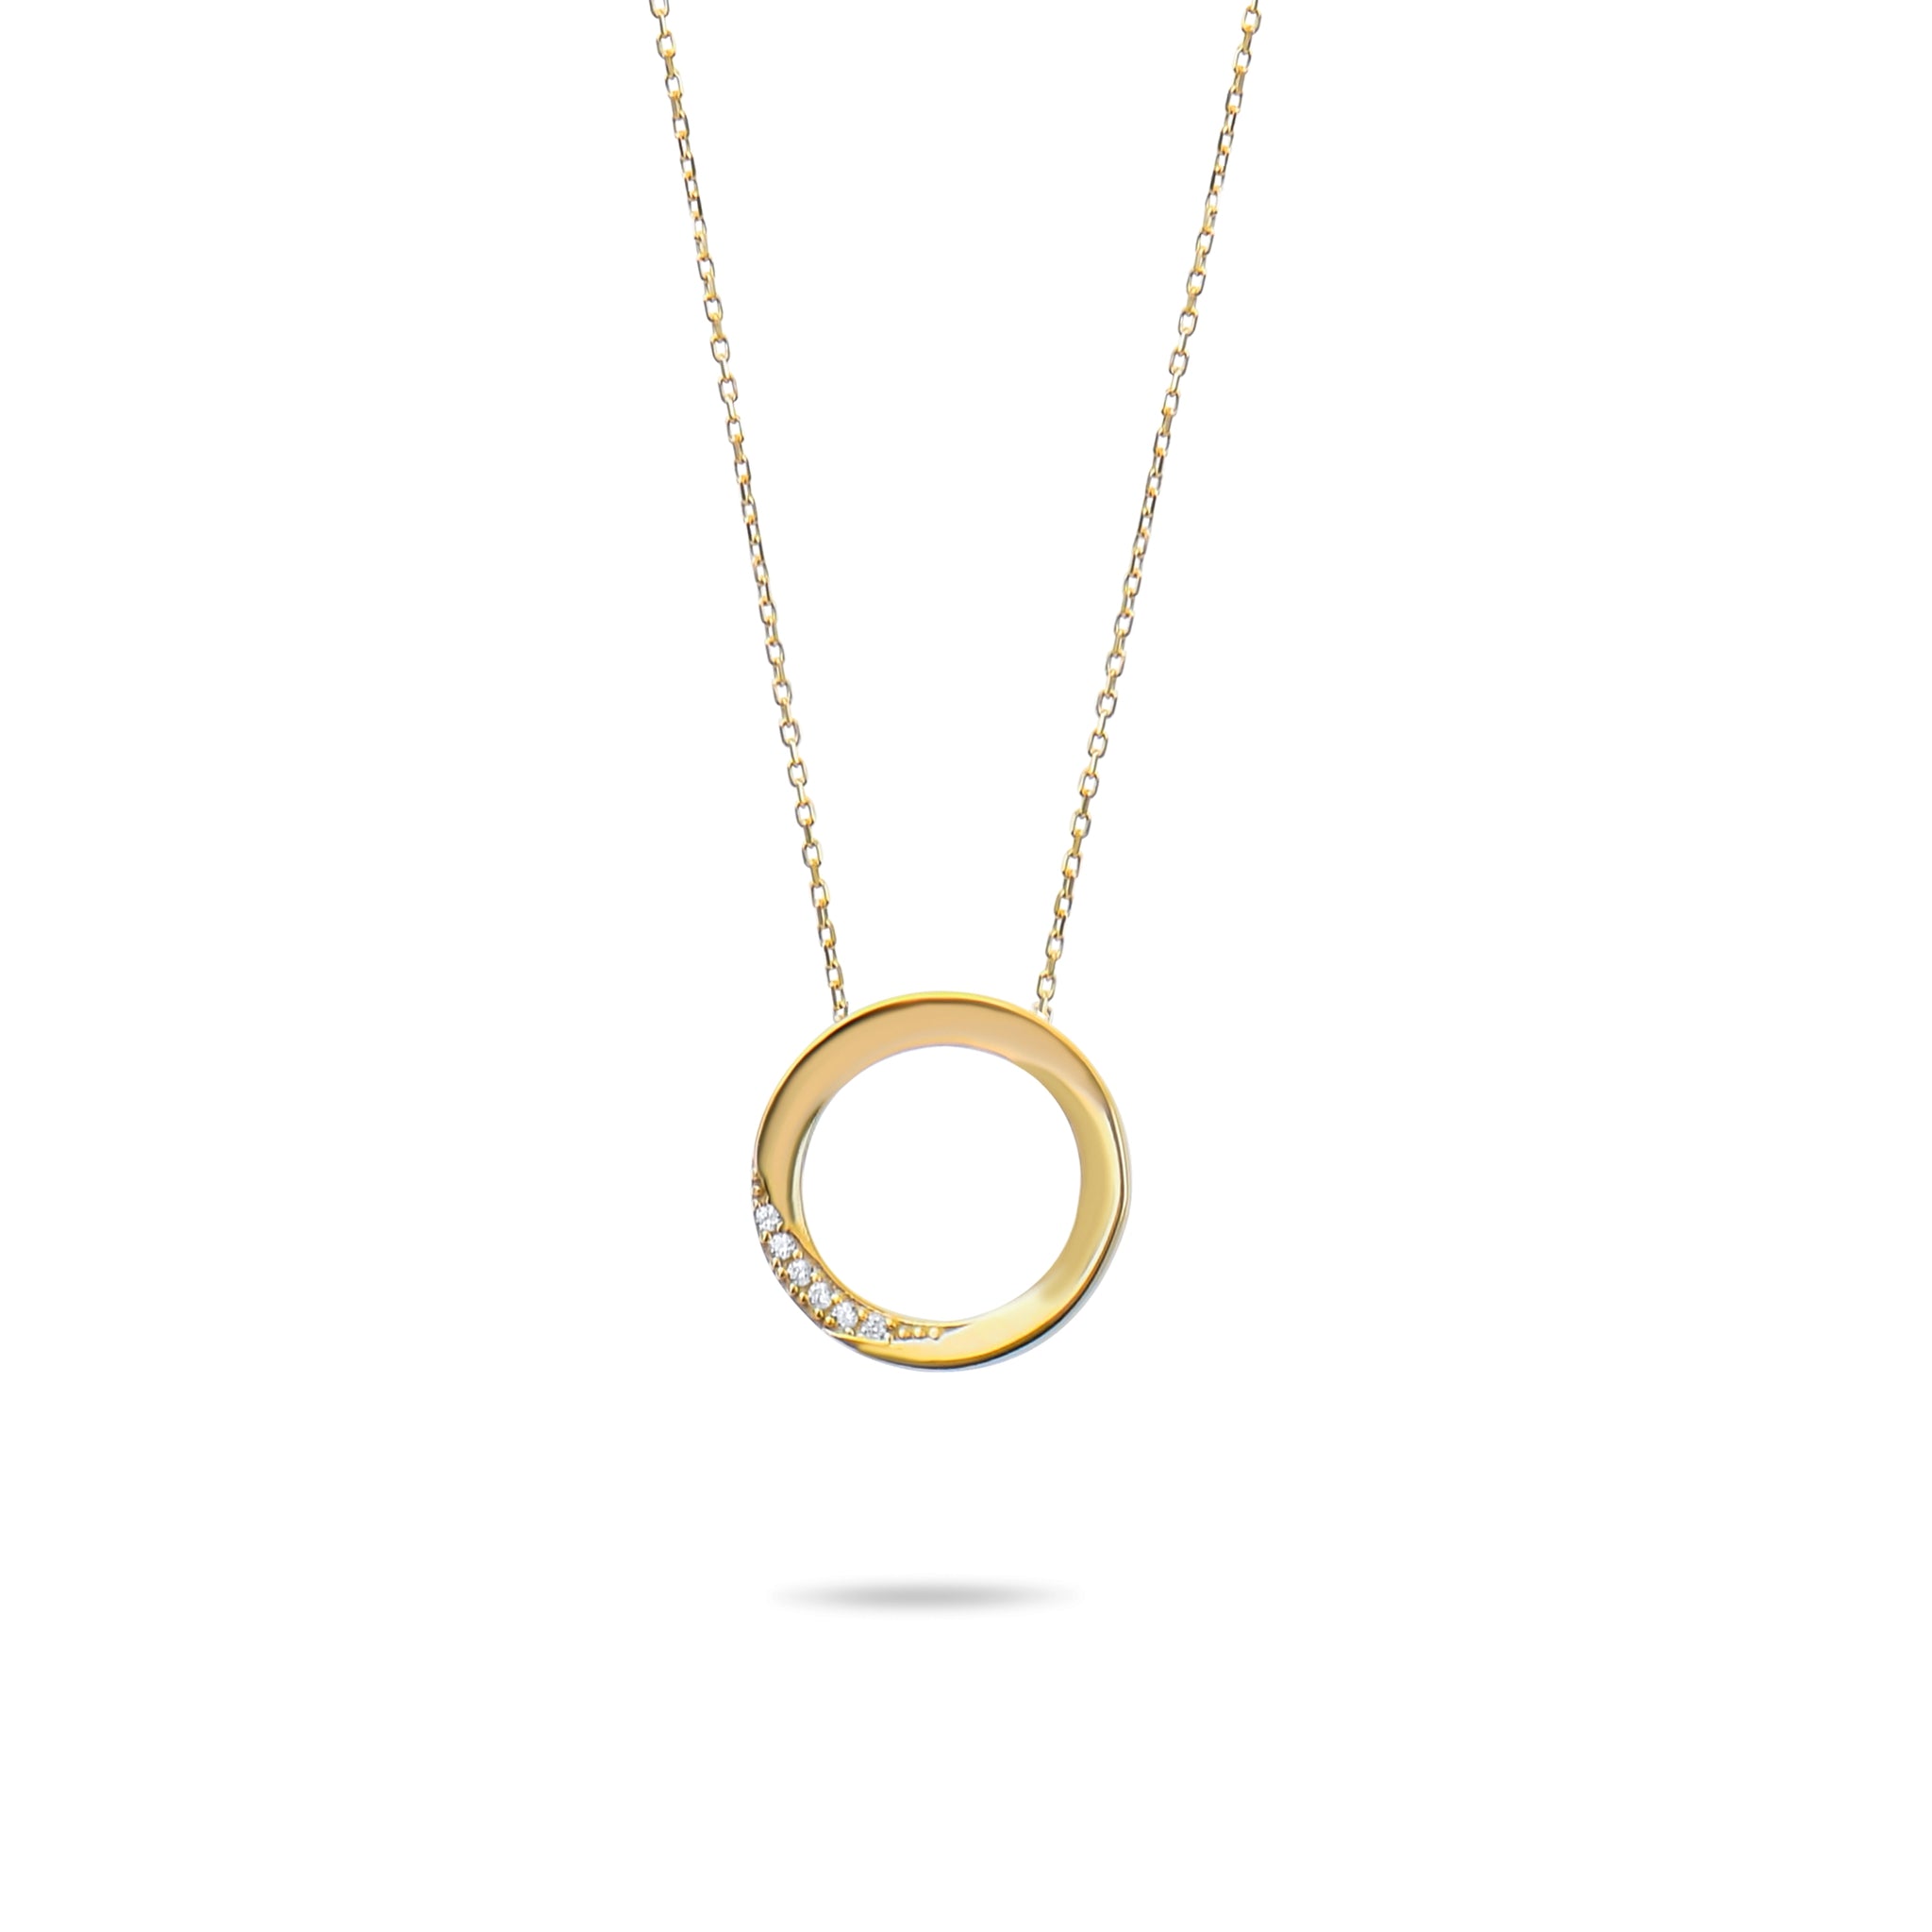 9ct Yellow Gold 10mm x 26mm 3-Disc Necklace 41cm/16